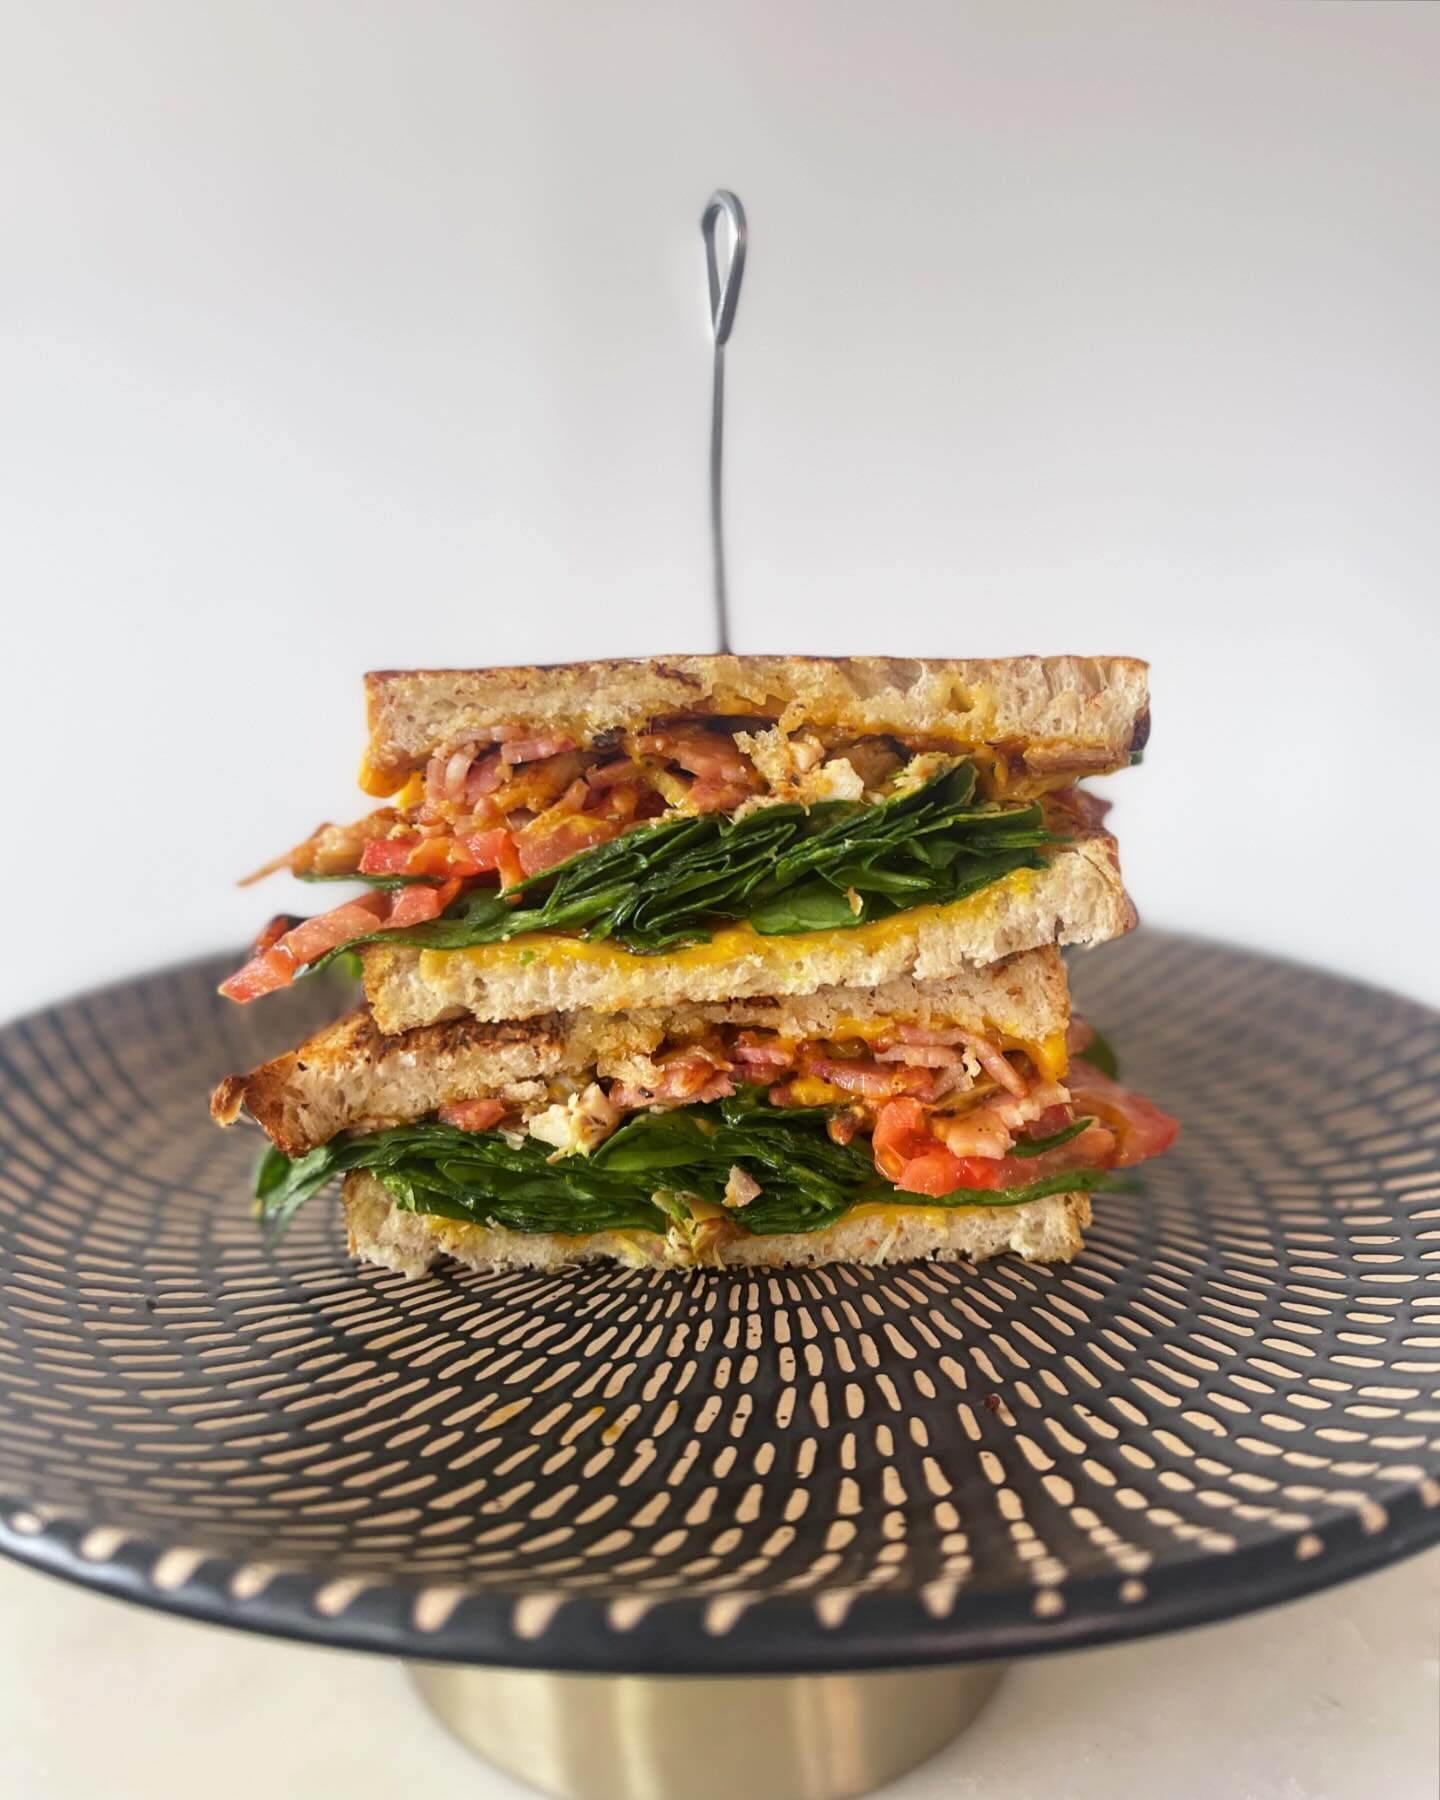 I asked Ethan @radpitt_ to make me something of his choice for lunch 👌 and he came up with this beauty, toasted Sanga with chicken, spiced aioli, spinach, bacon, tomato, cheese, delicious to say the least 😋 will it be on the menu??? You have to con